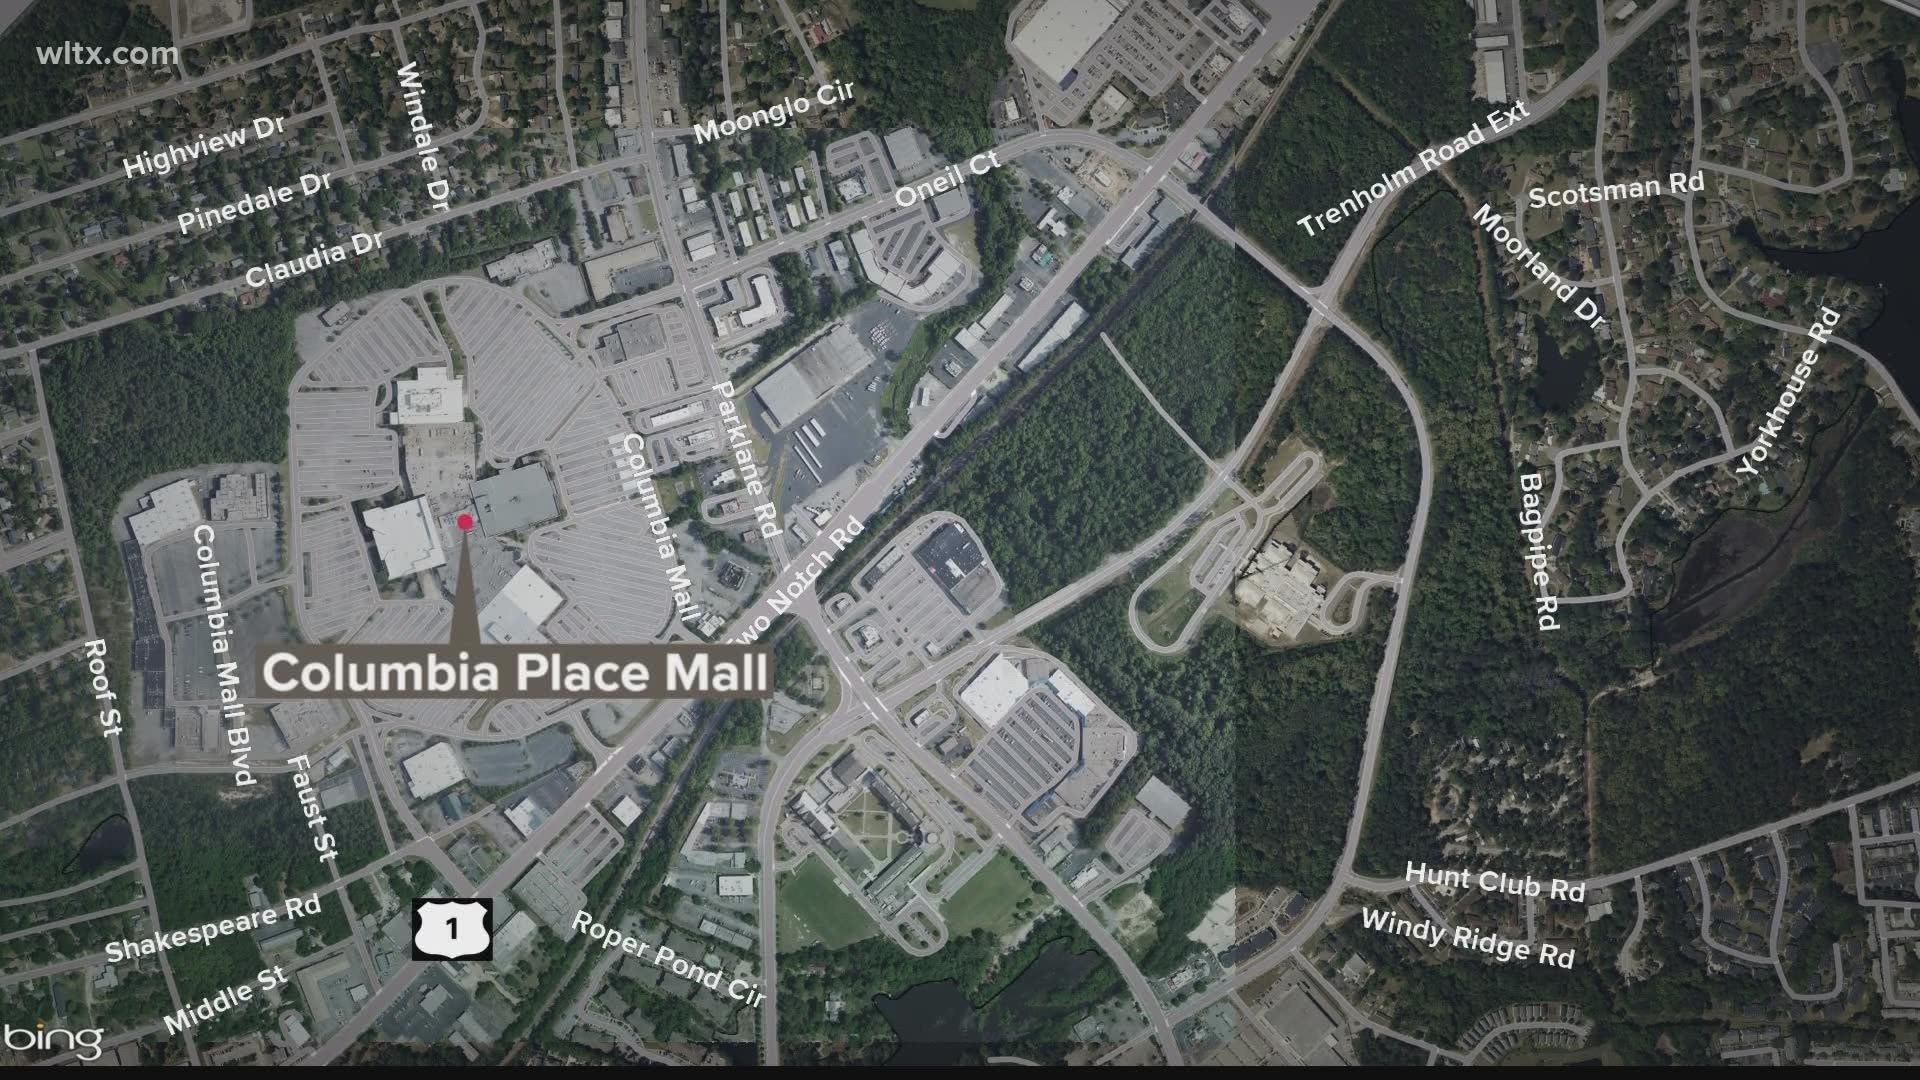 Man injured in shooting at Columbia Place Mall